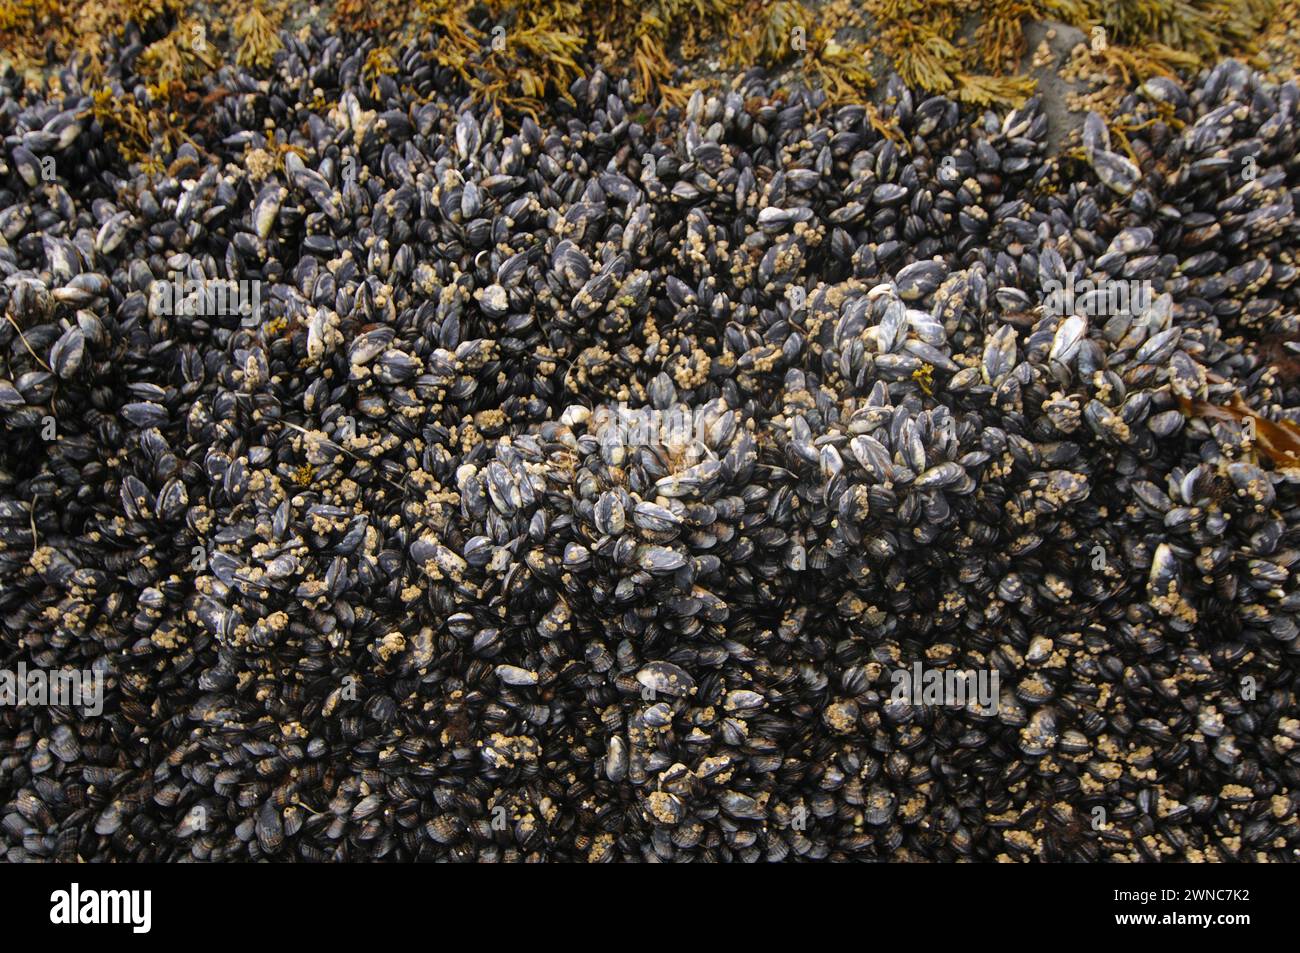 Muscles edible food on rocks in intertidal zone on shi shi beach olympic national park washington state usa Stock Photo